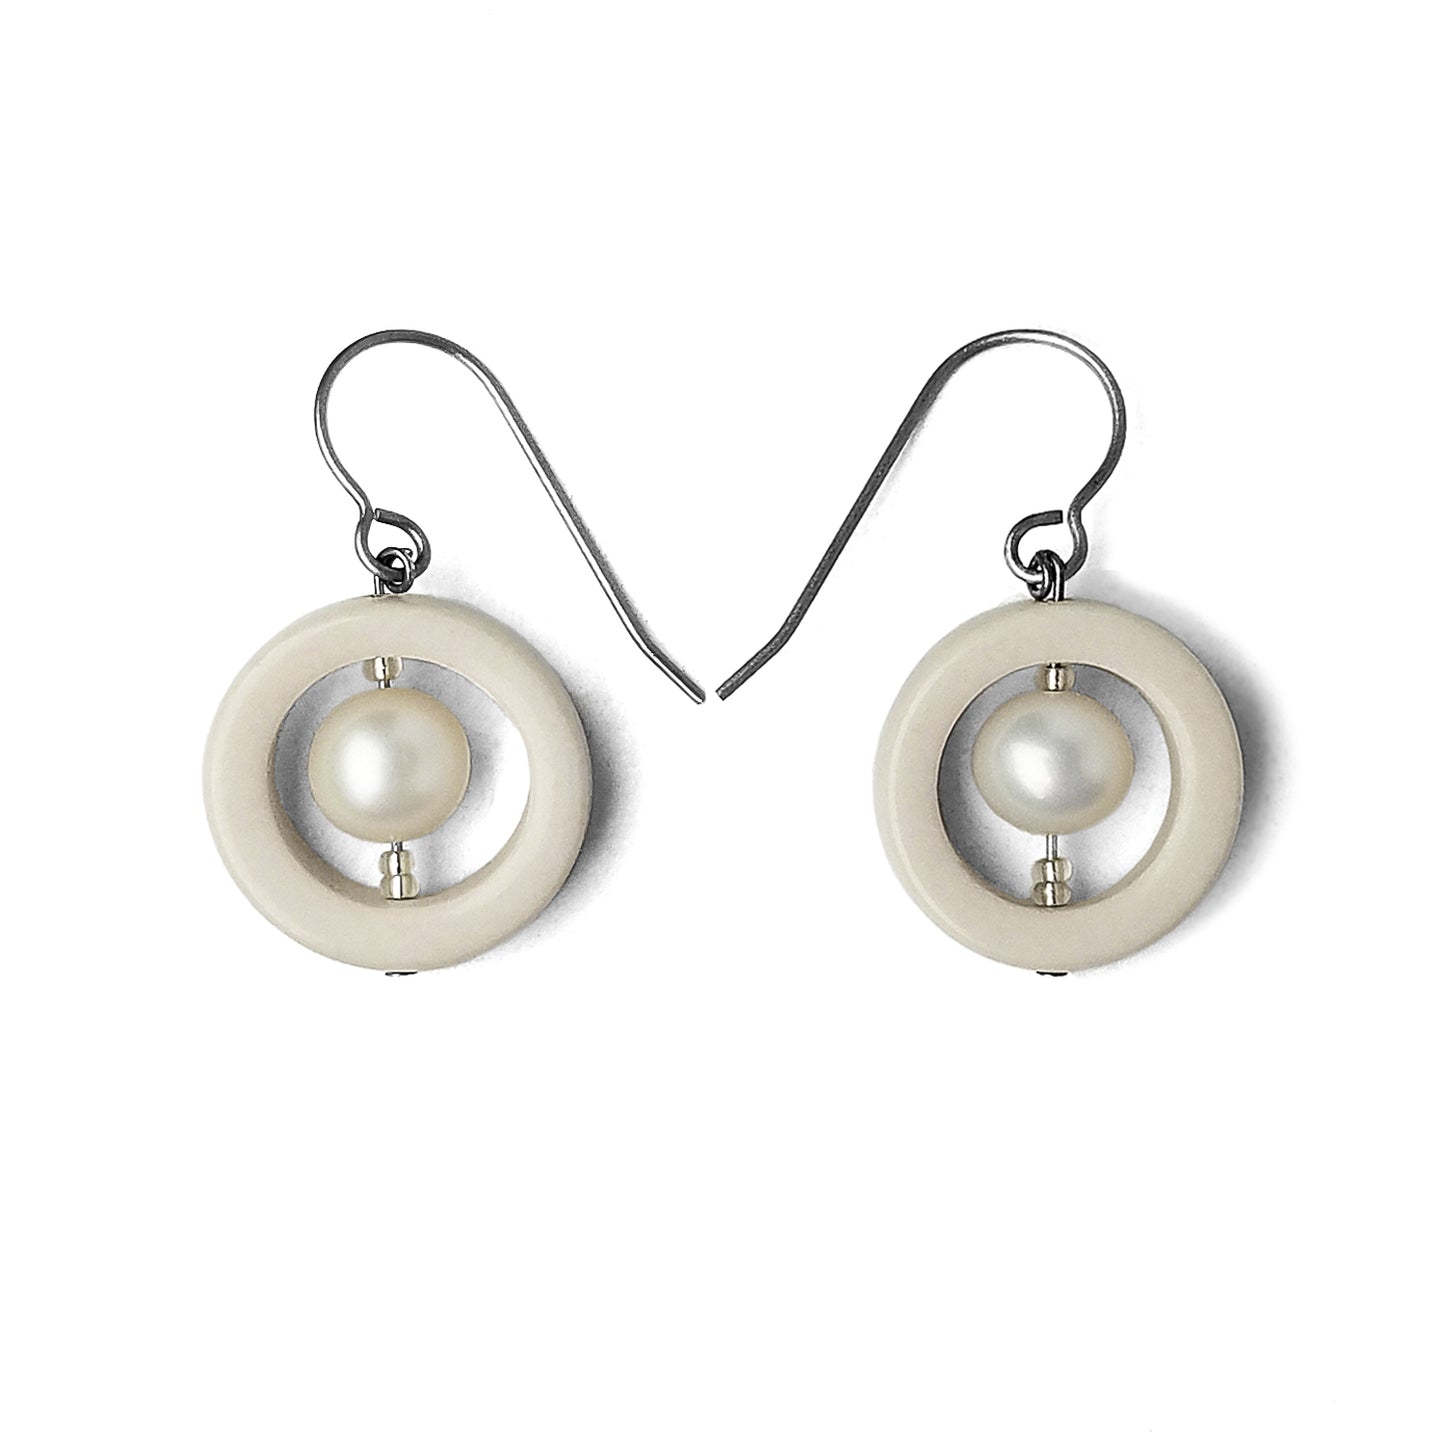 Porcelain and Pearls Earrings.  For each earring, a ring of creamy white porcelain frames a cultured freshwater pearl and is suspended from titanium hooks.  Earrings are displayed on a white background.